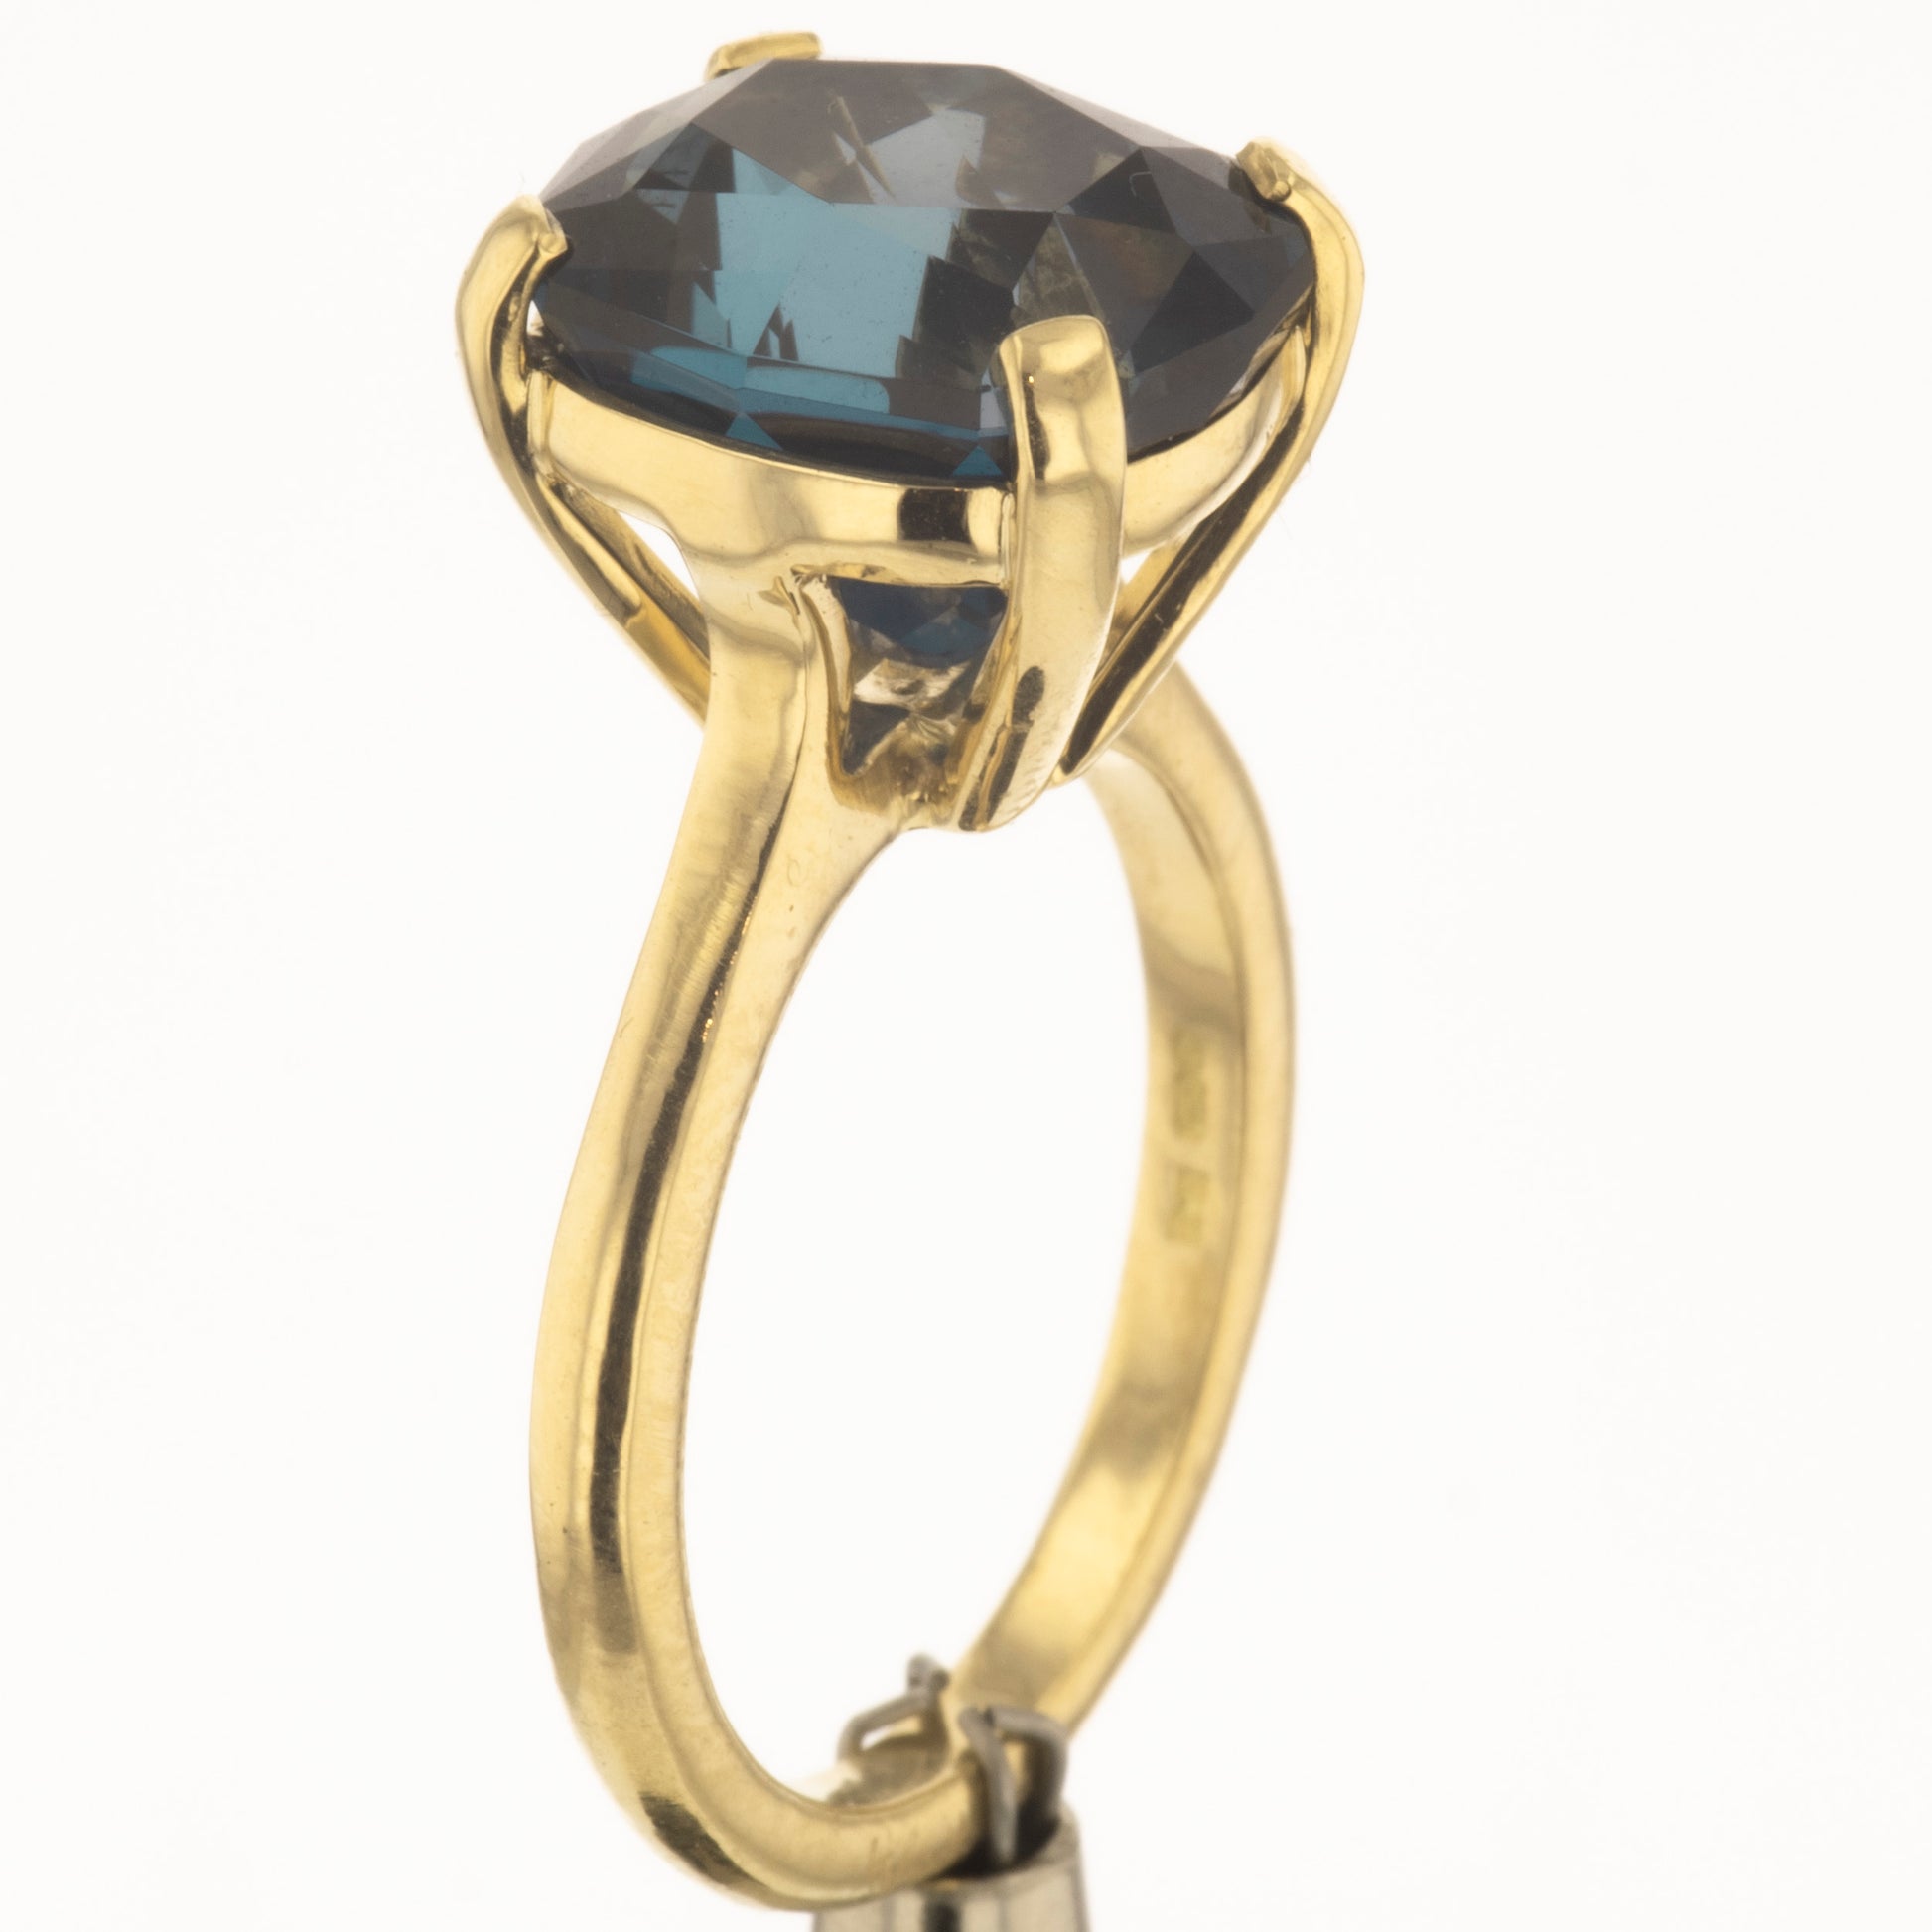 London blue Topaz in yellow gold